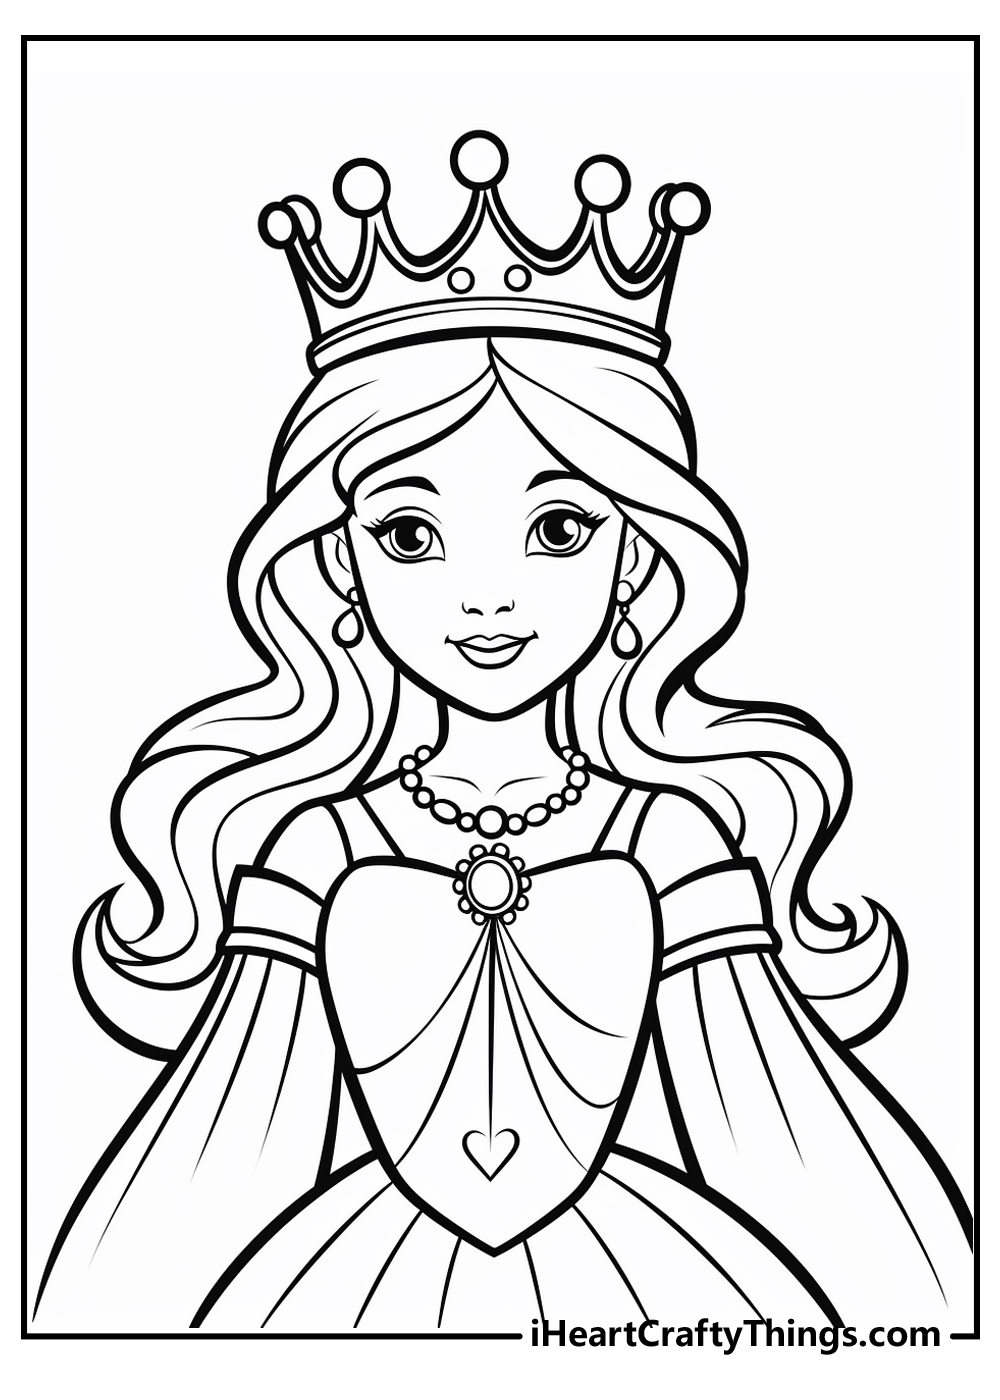 Queen coloring pages free printables